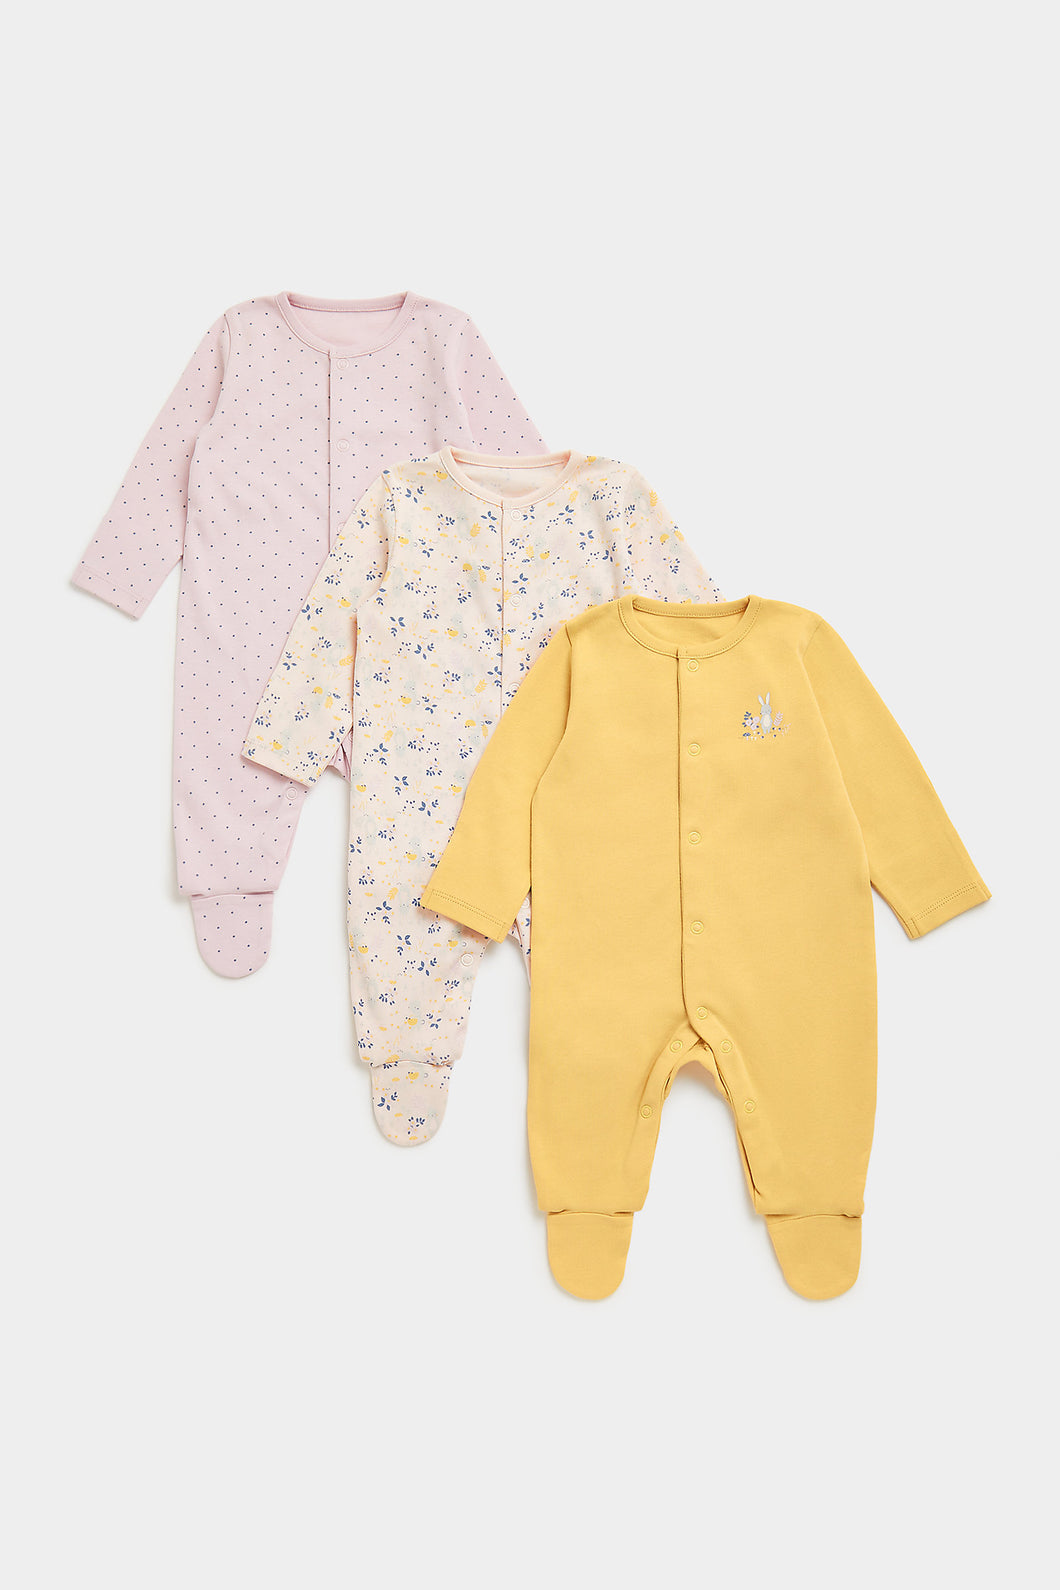 Mothercare Acorn Bunny Baby Sleepsuits - 3 Pack